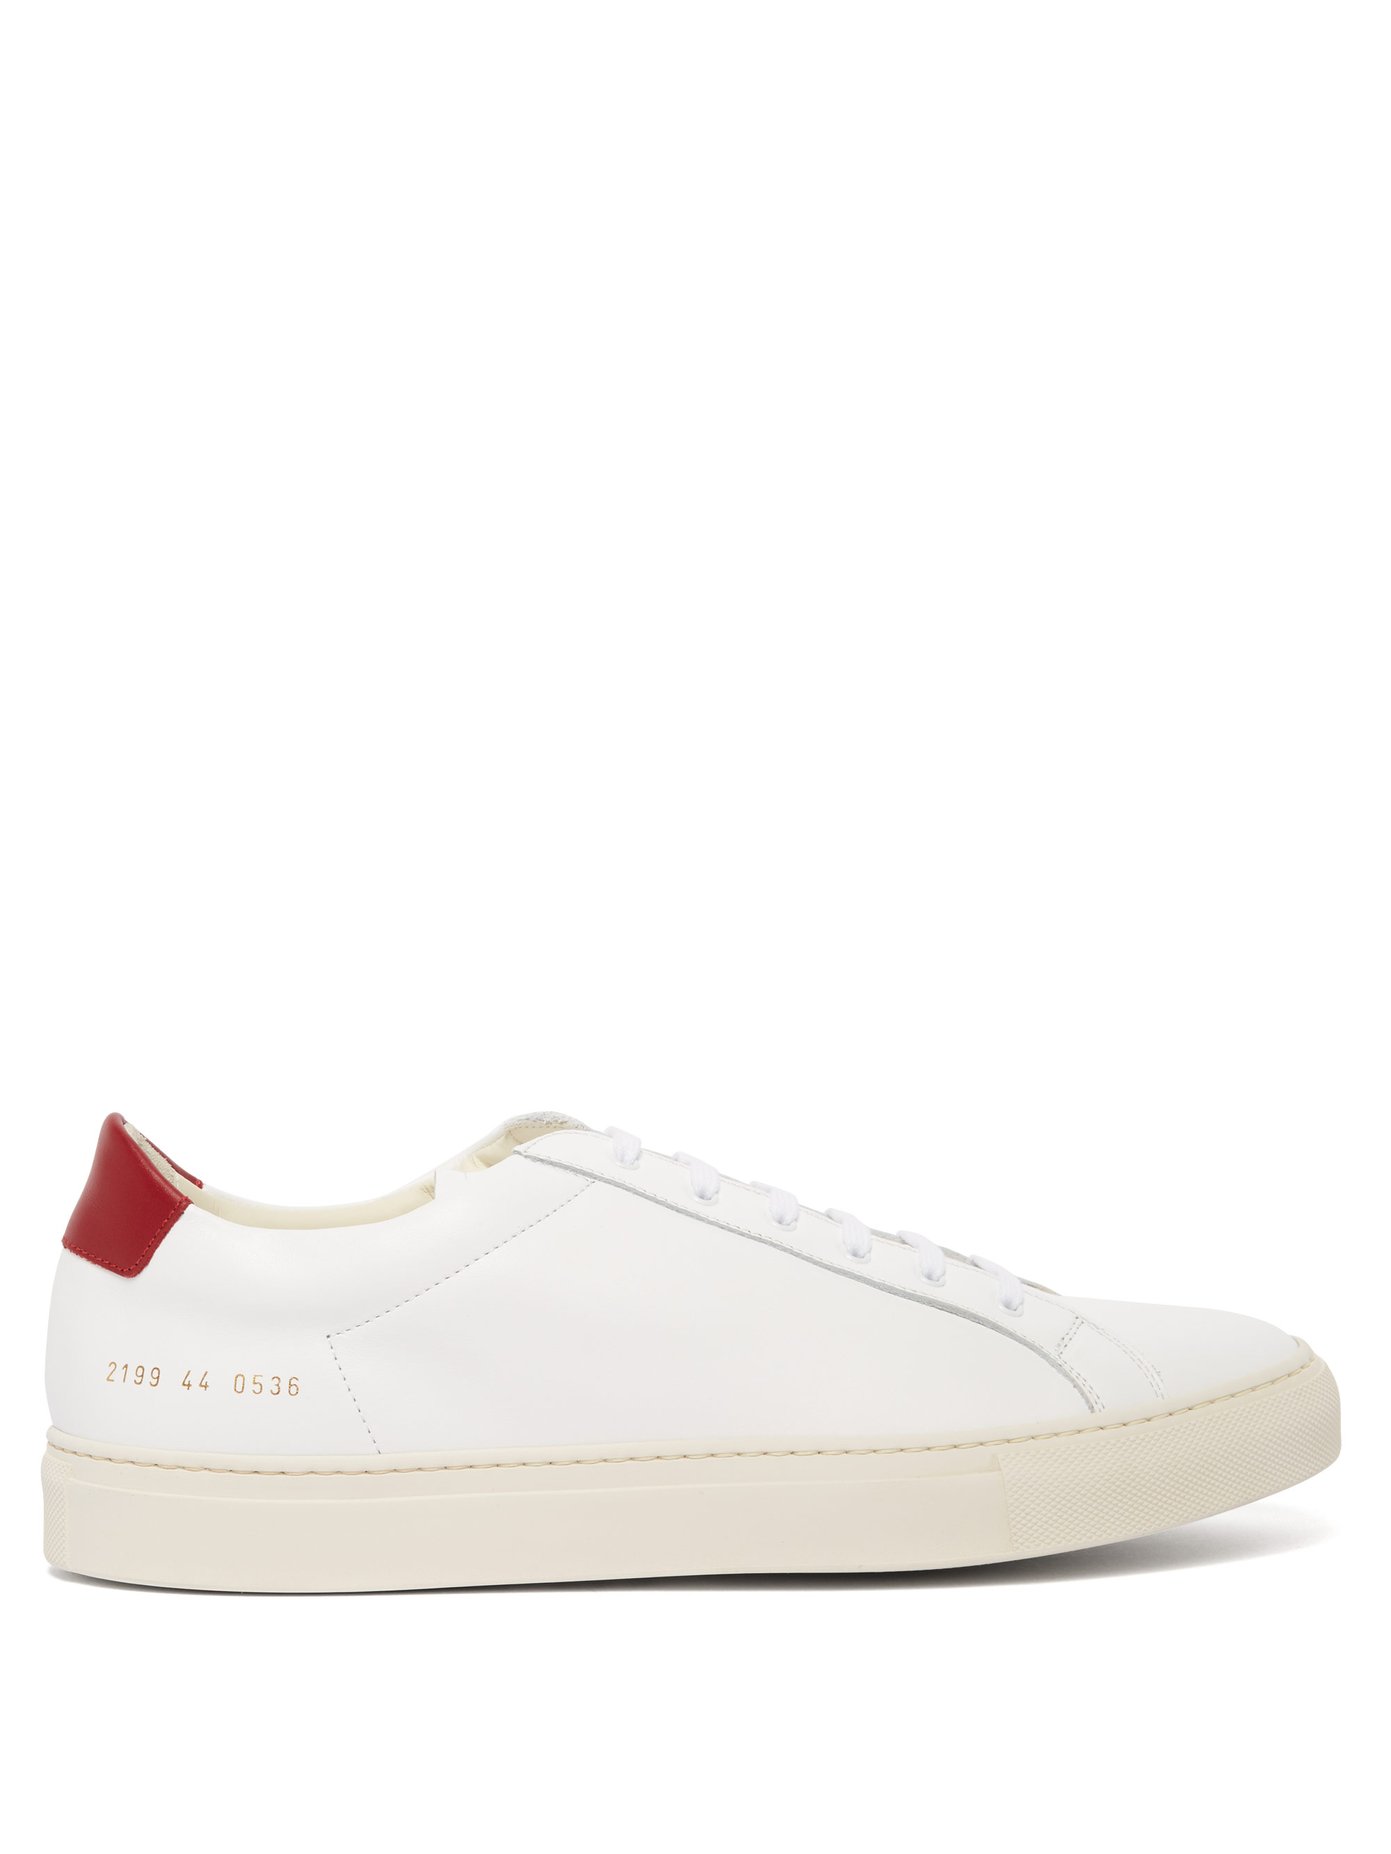 common projects retro low